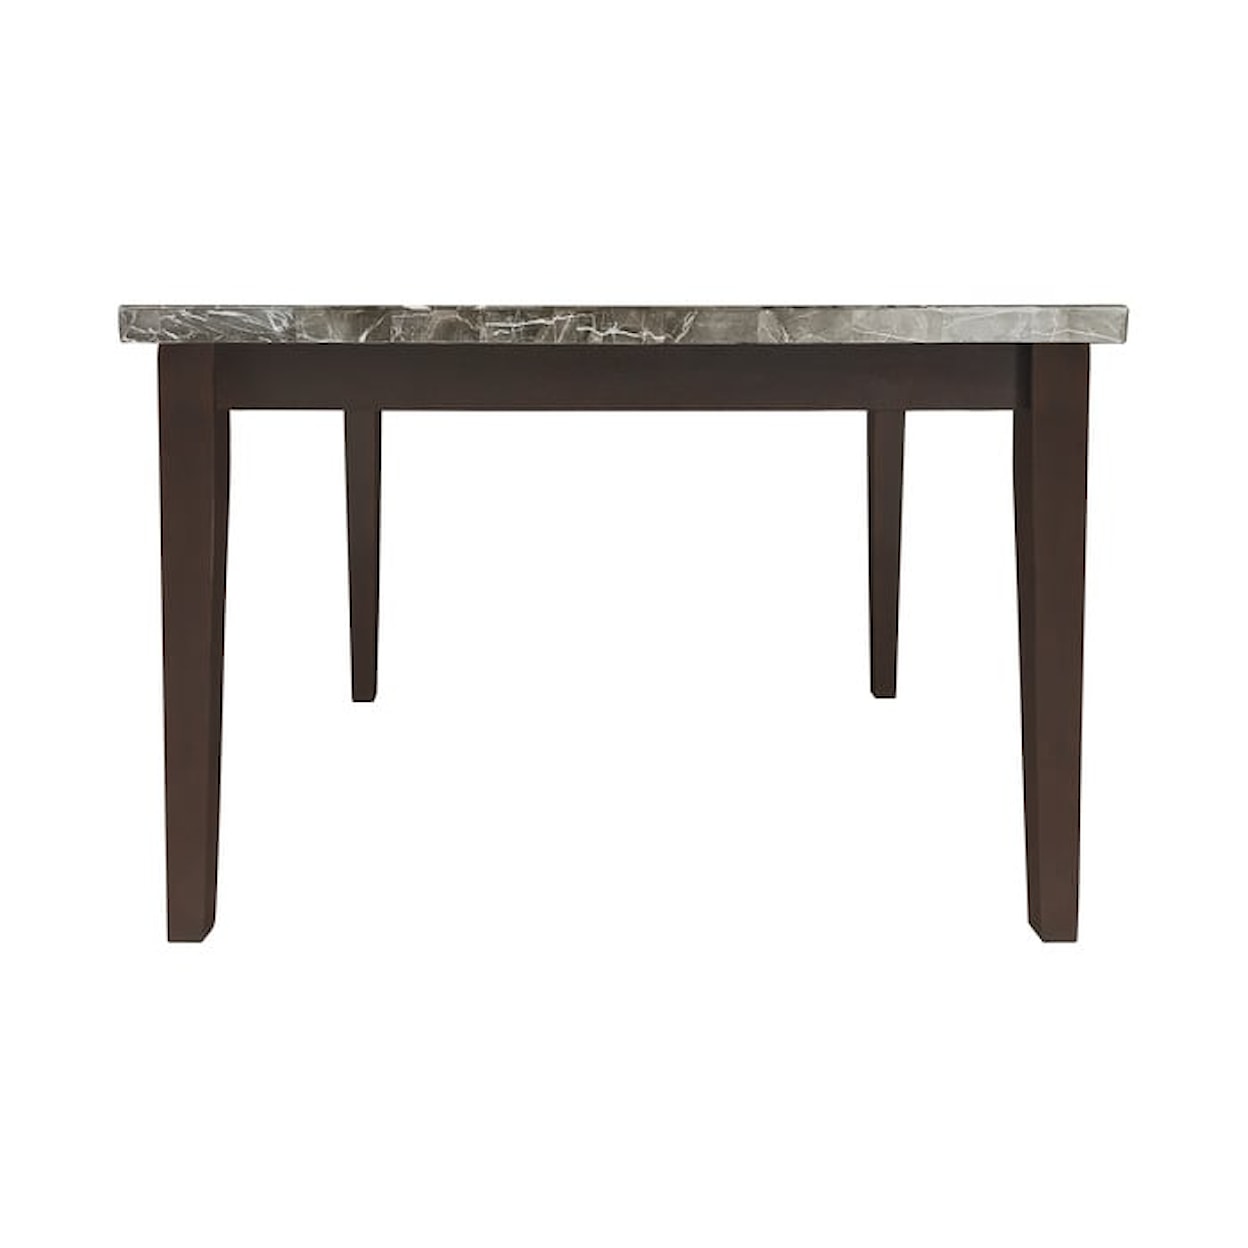 Homelegance Furniture Decatur Counter Height Dining Table